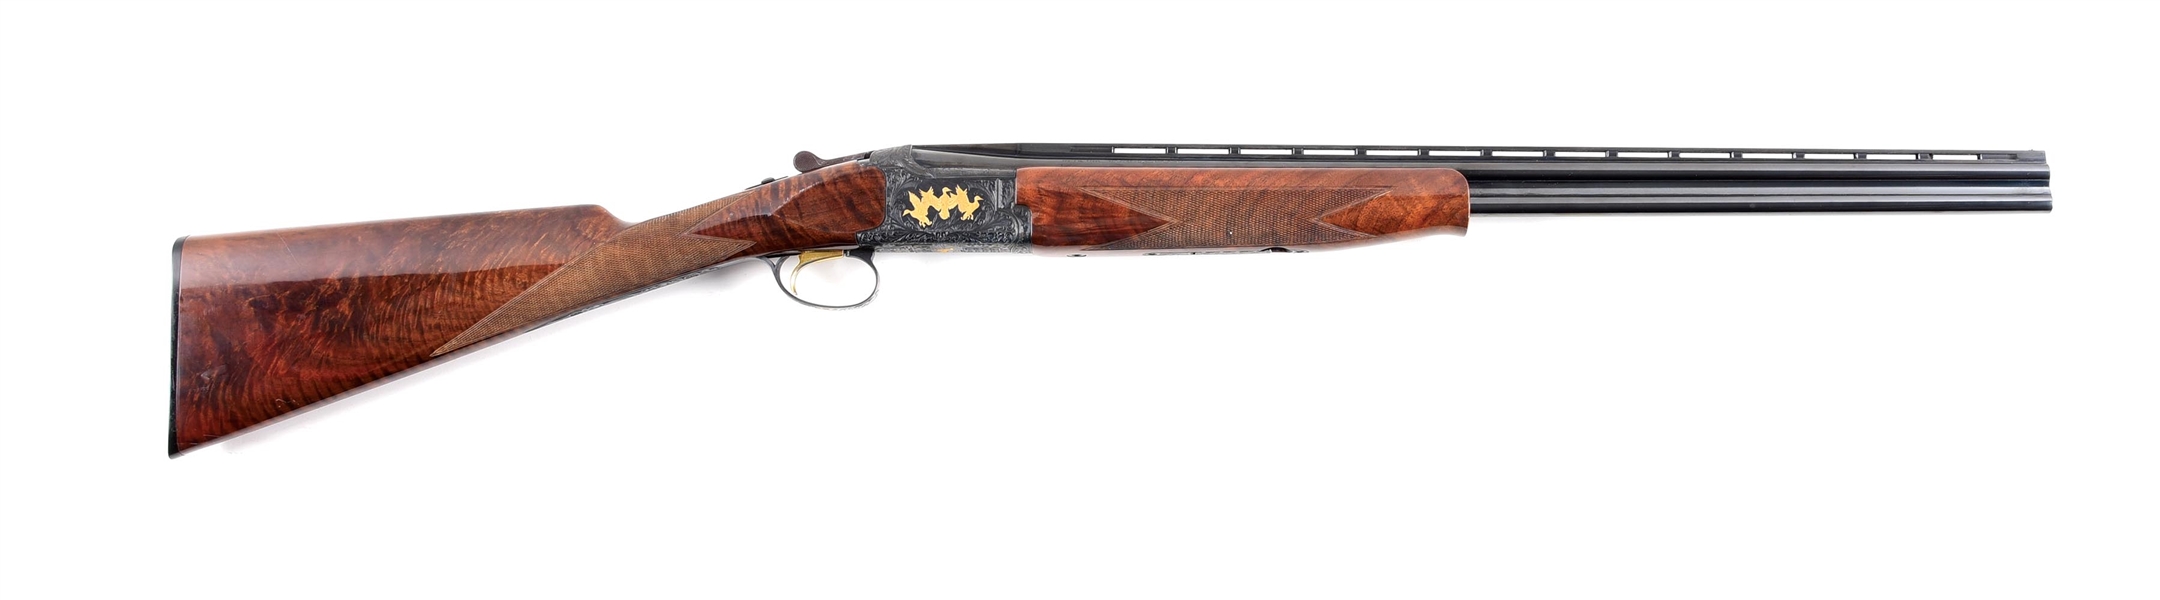 (M) GOLD INLAID & ENGRAVED BROWNING CITORI SUPERLIGHT GRADE VI OVER/UNDER SHOTGUN WITH FACTORY BOX.